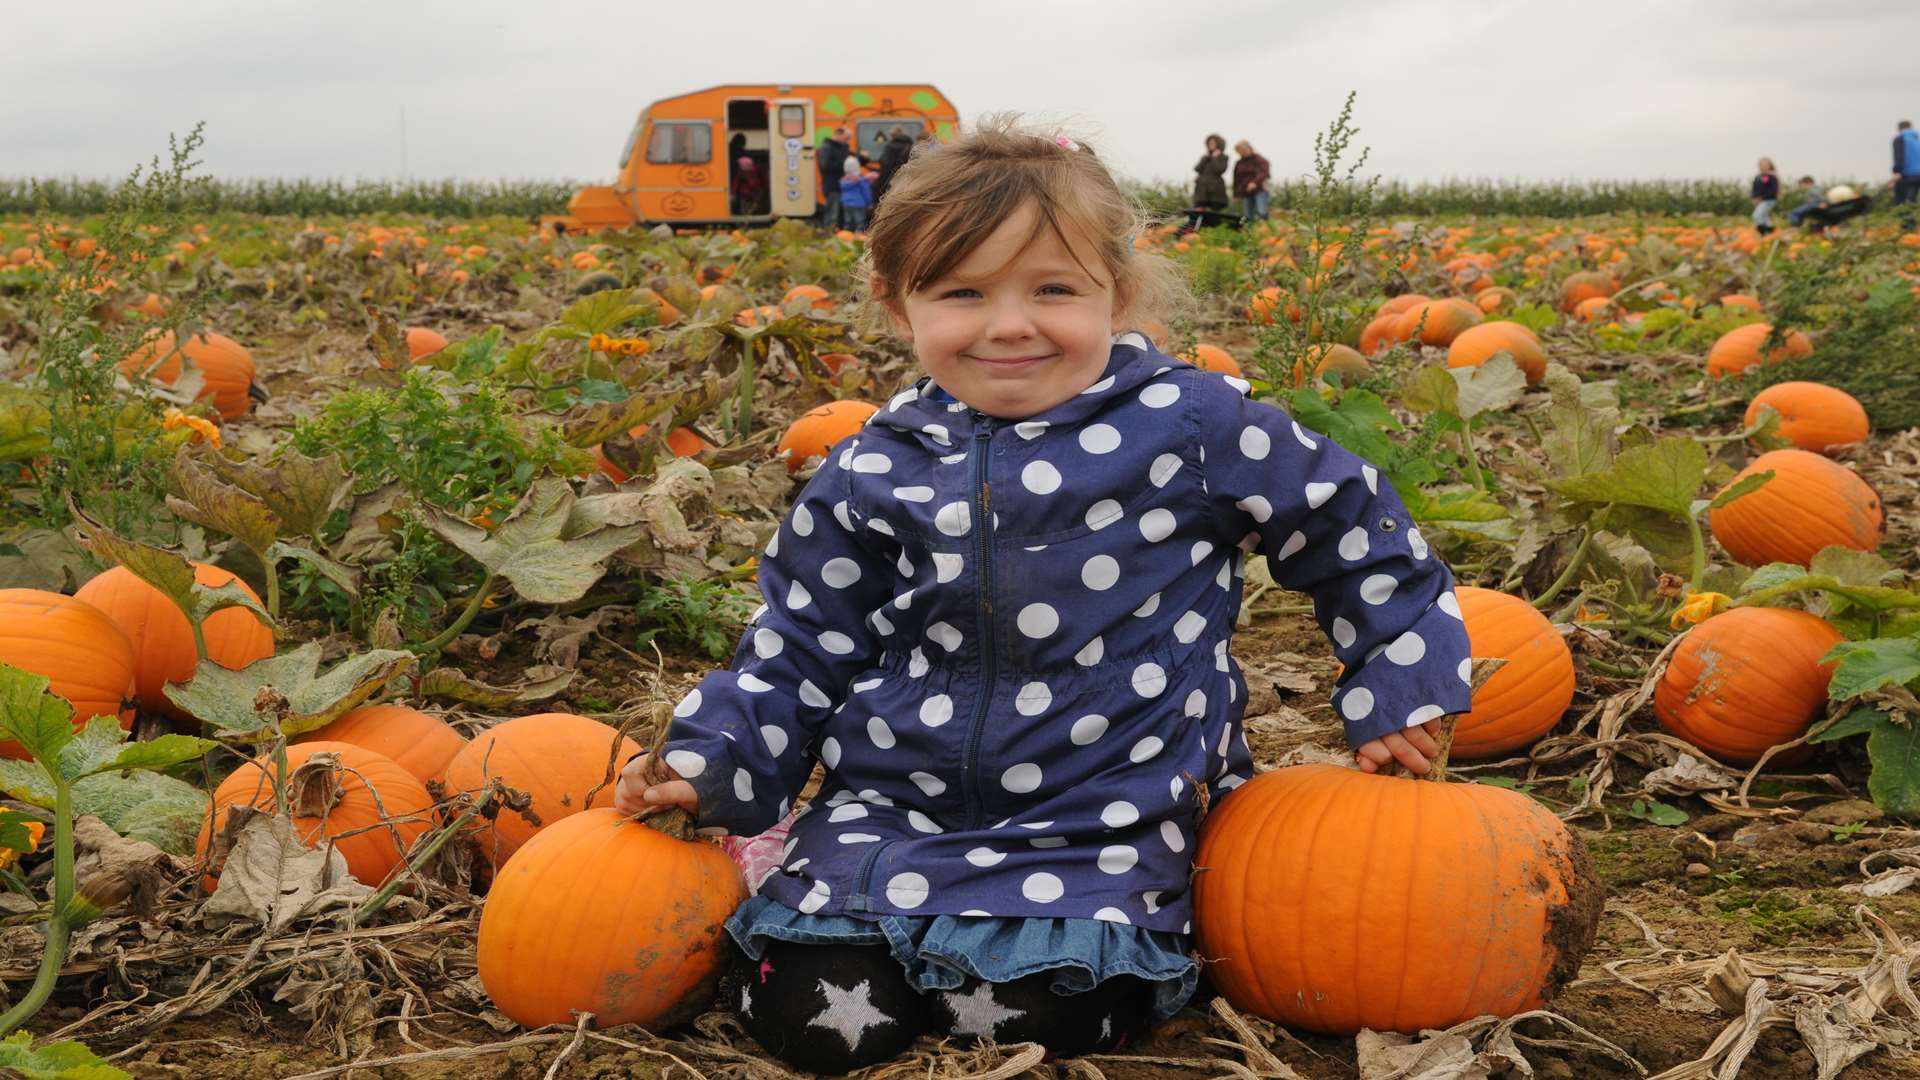 Aoife Bold, 4, with pumpkins at Beluncle Farm, Stoke Road, Hoo.